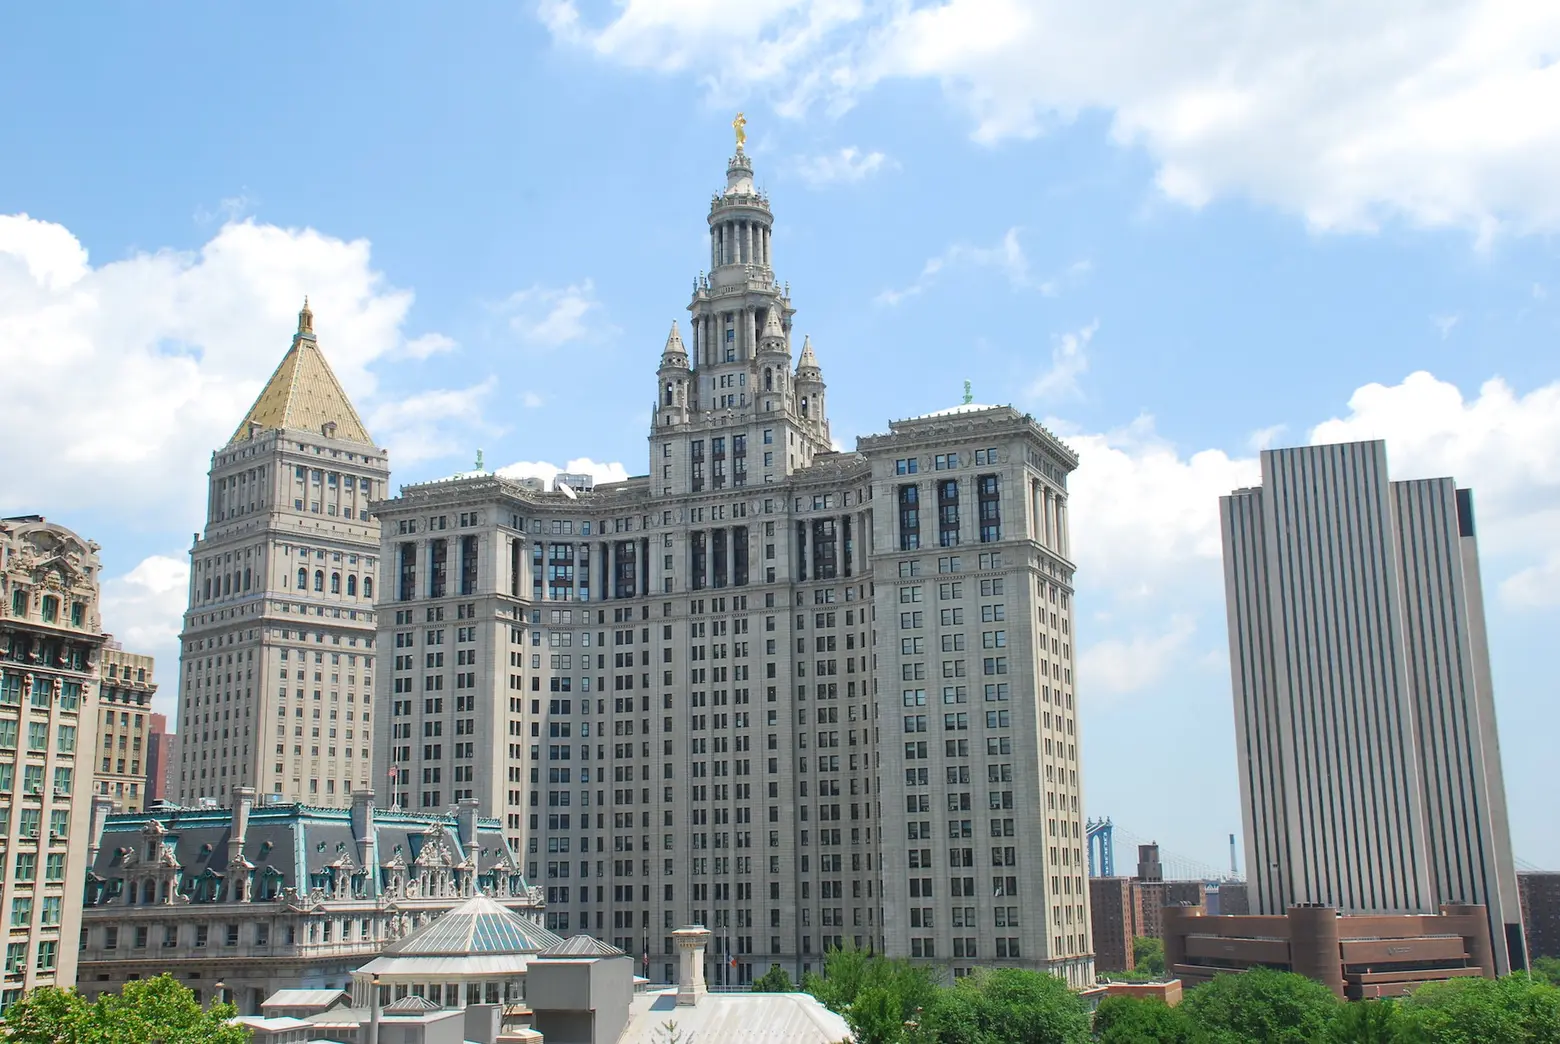 Landmarks Preservation Commission to resume public hearings virtually